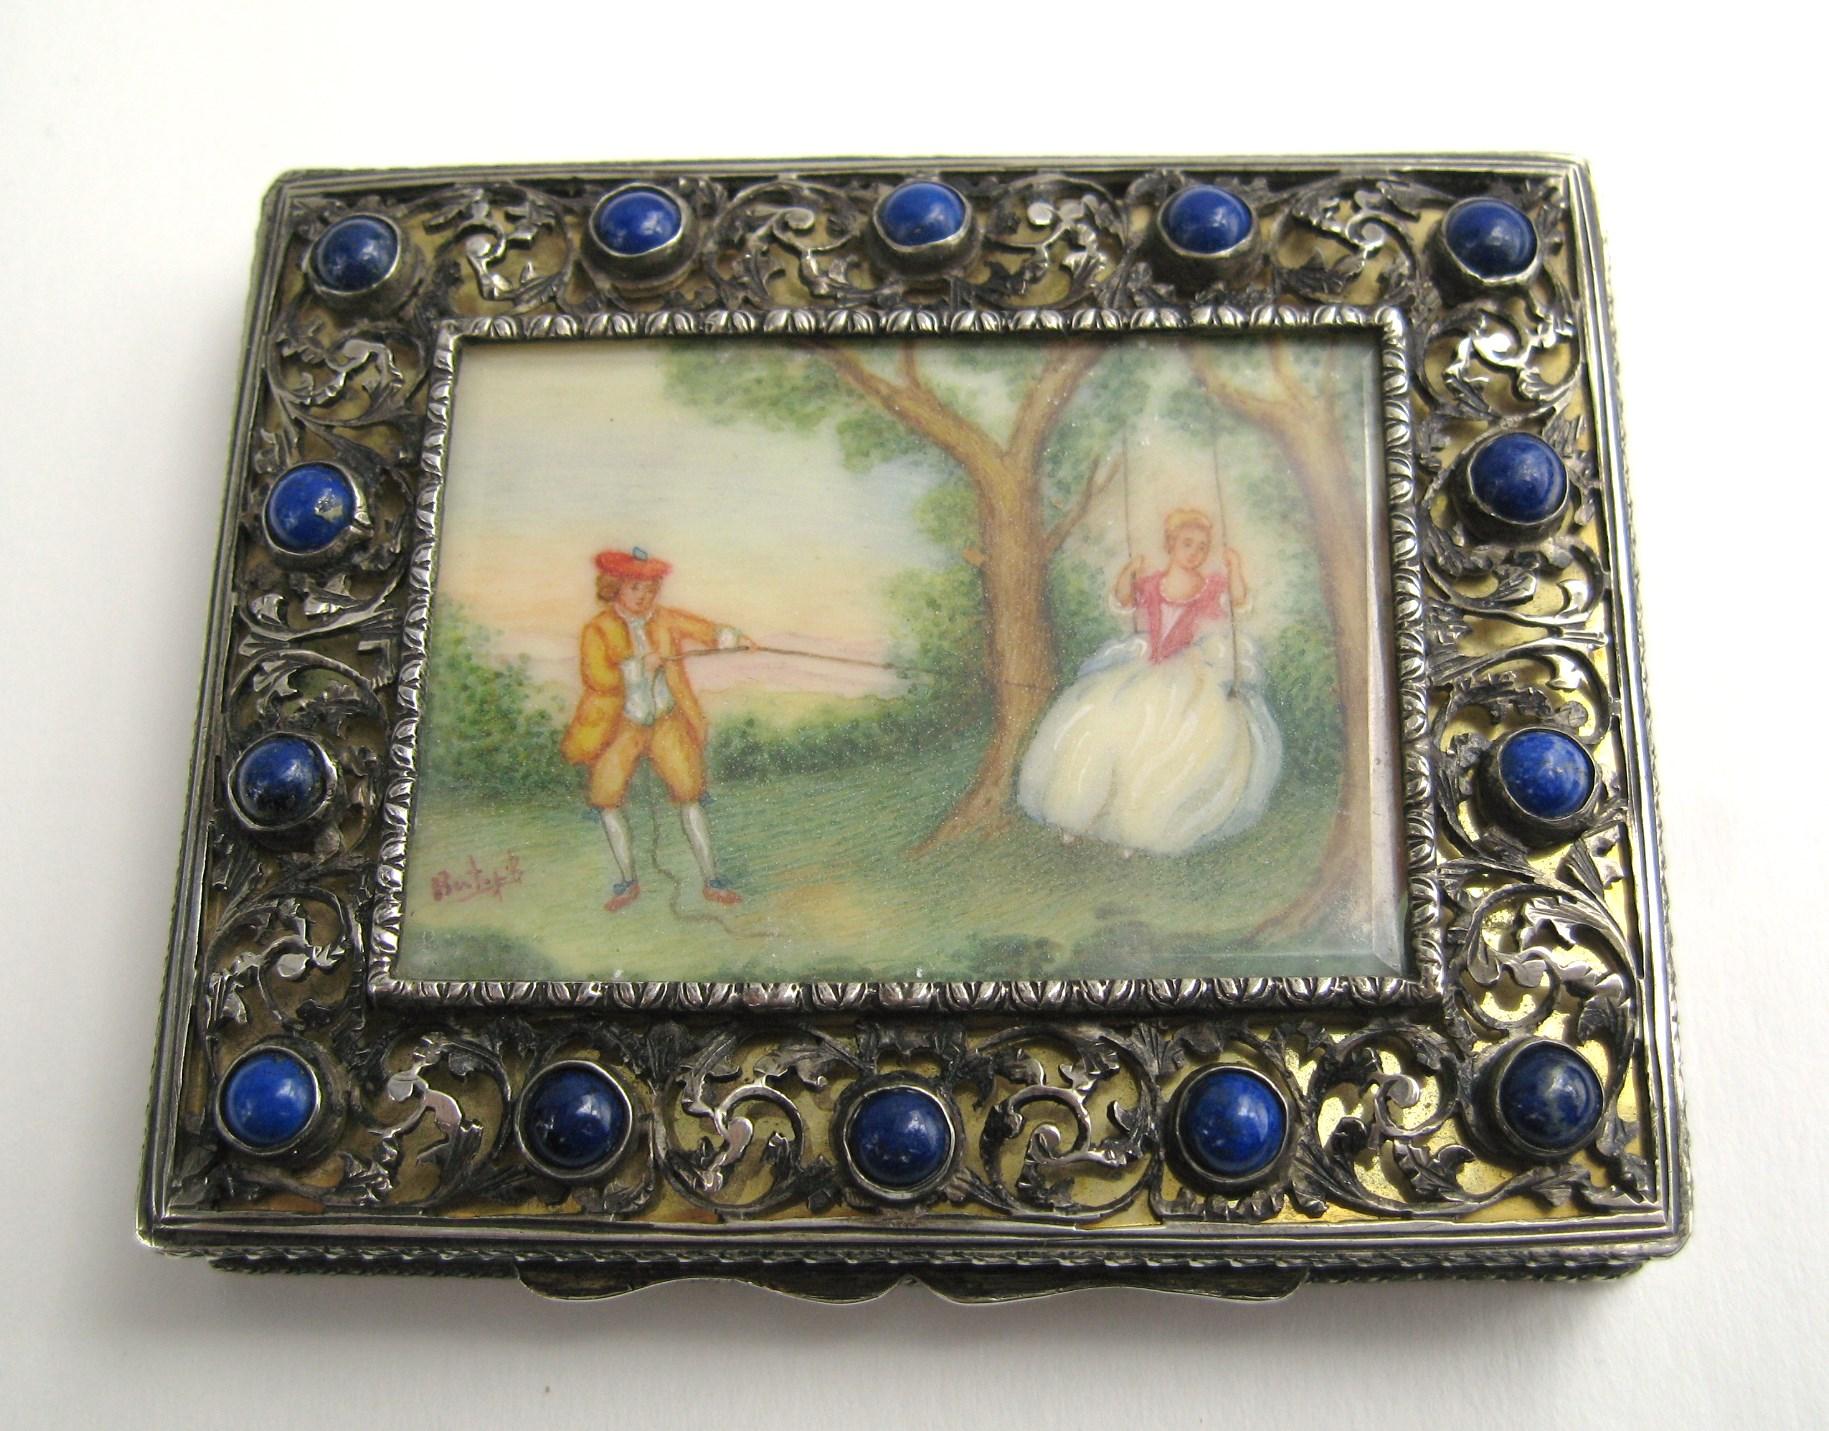  silver compact with Lapis Lazuli, Hand painted miniature scene For Sale 6